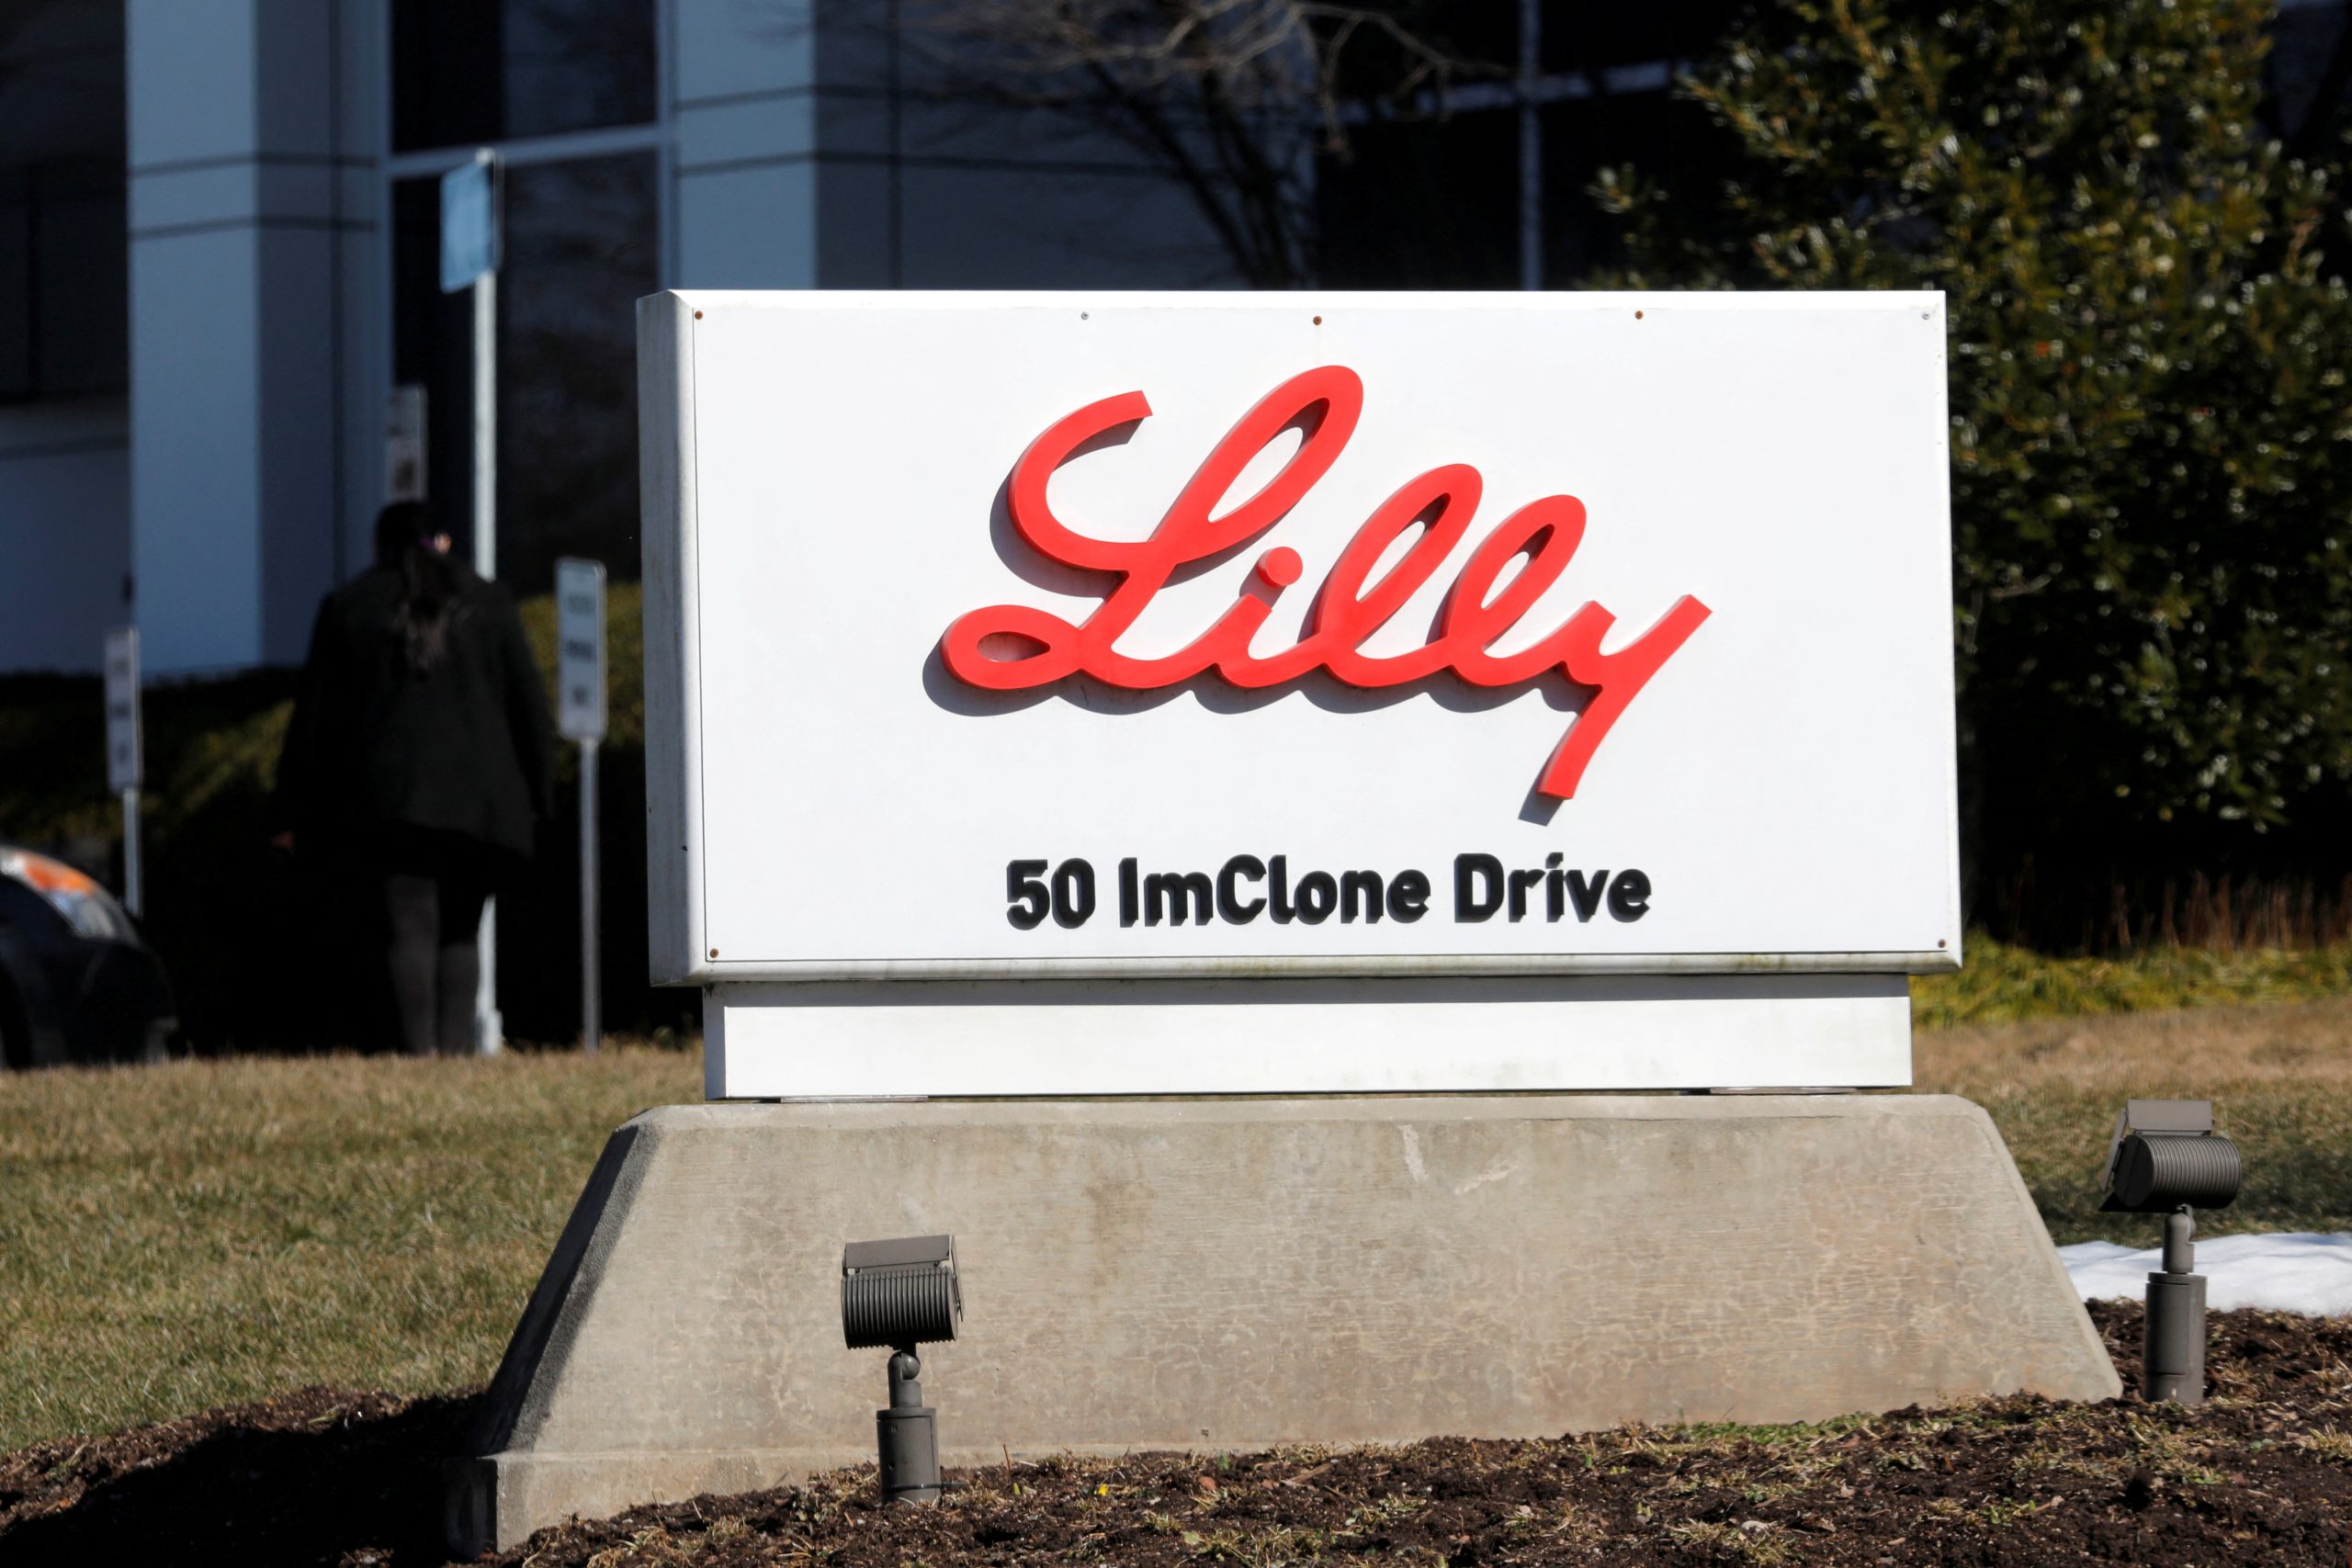 An Eli Lilly and Company pharmaceutical manufacturing plant is pictured in Branchburg, New Jersey